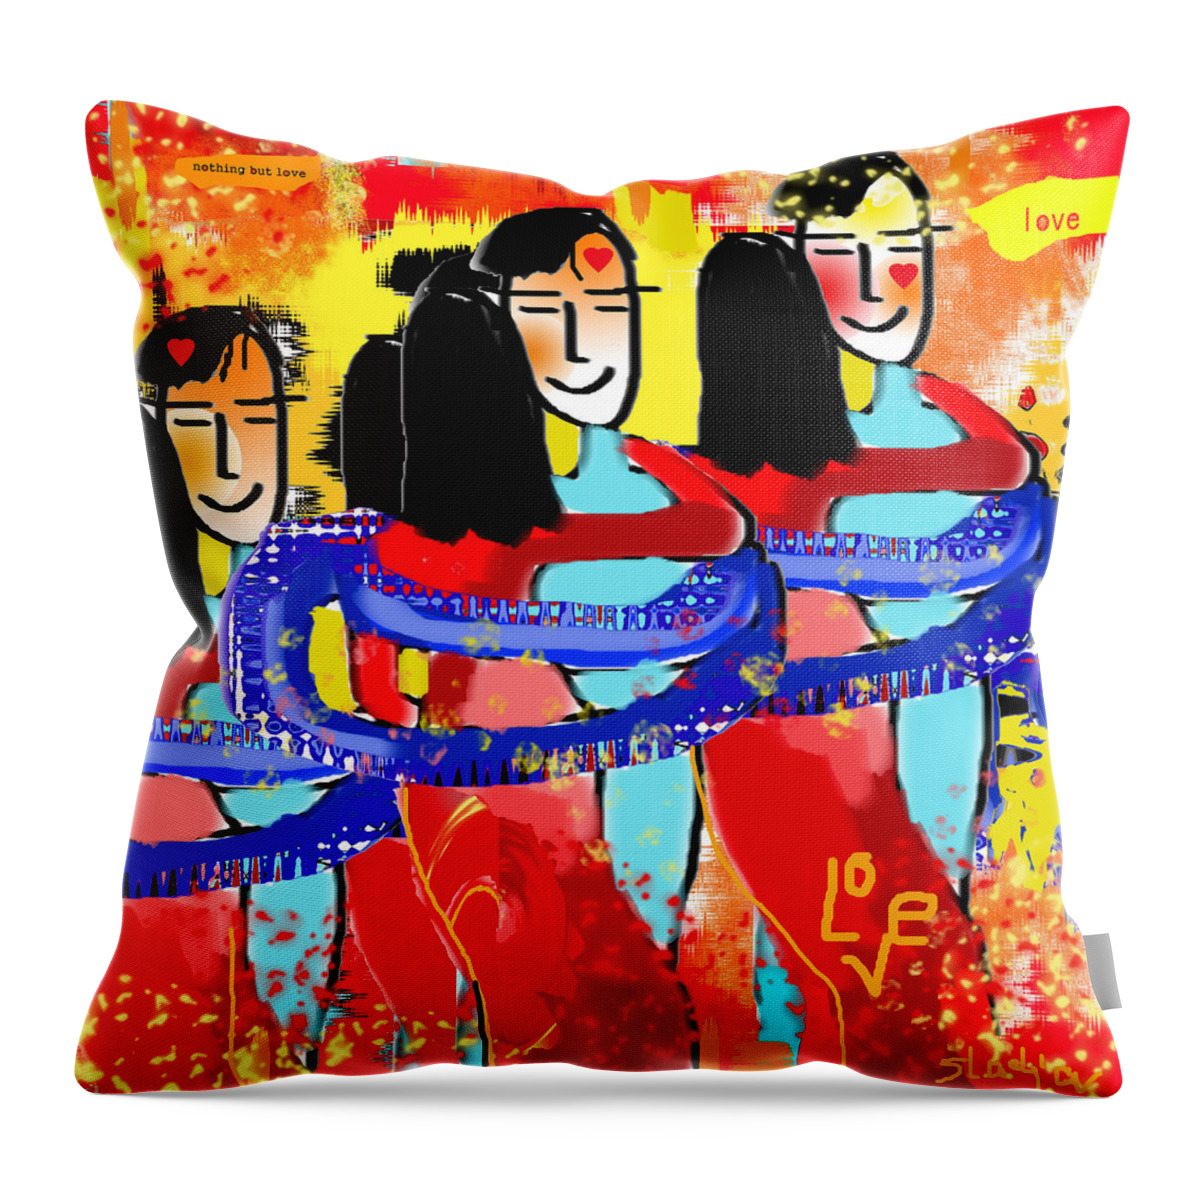 Love Throw Pillow featuring the digital art Nothing but love by Sladjana Lazarevic